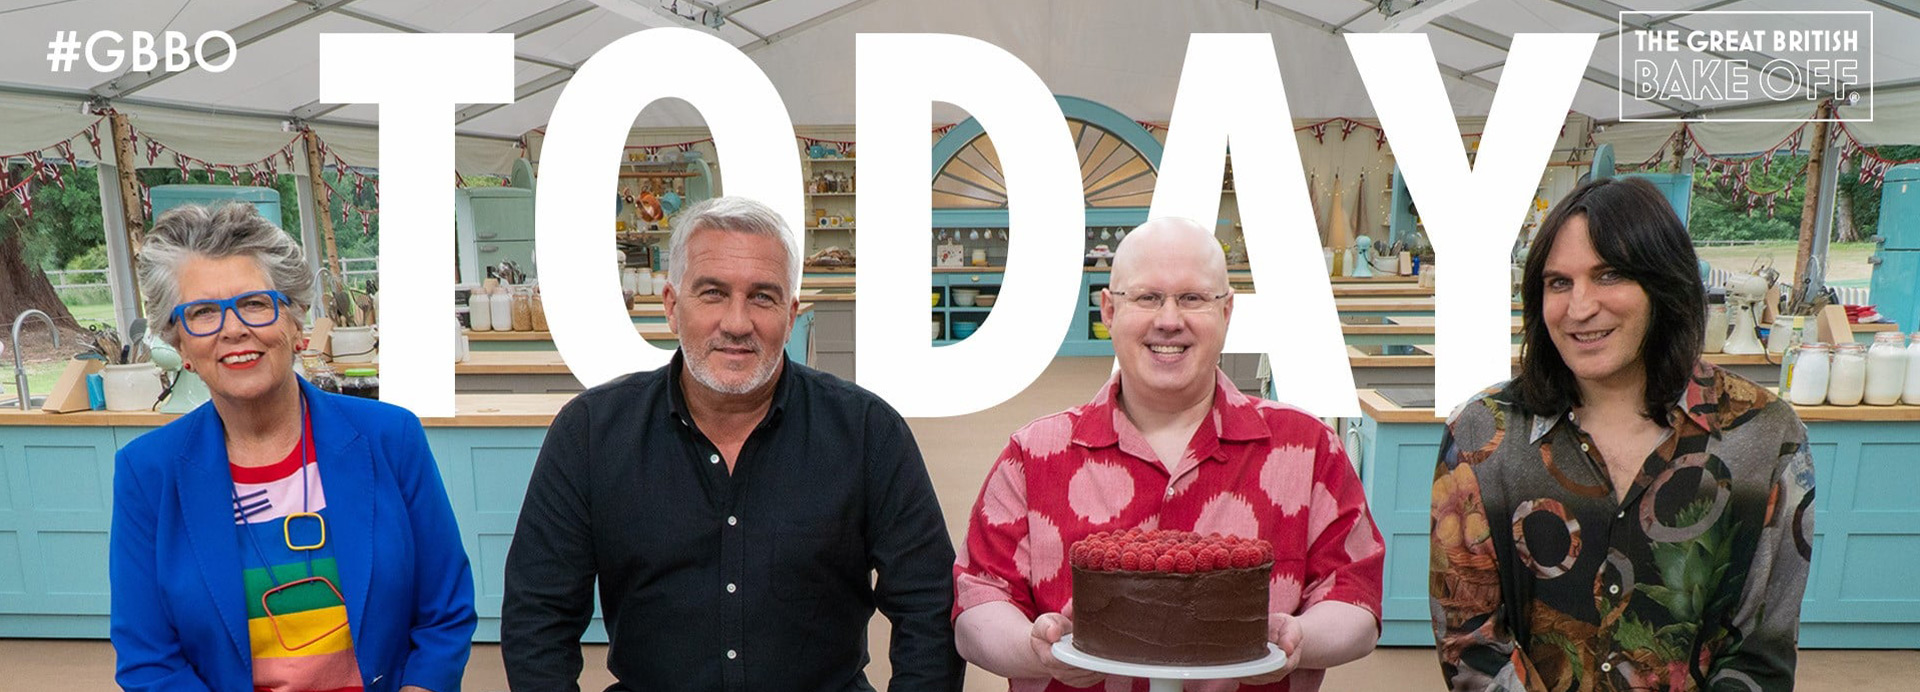 GBBO Channel Four Great British Bake Off TV Production Broadcast